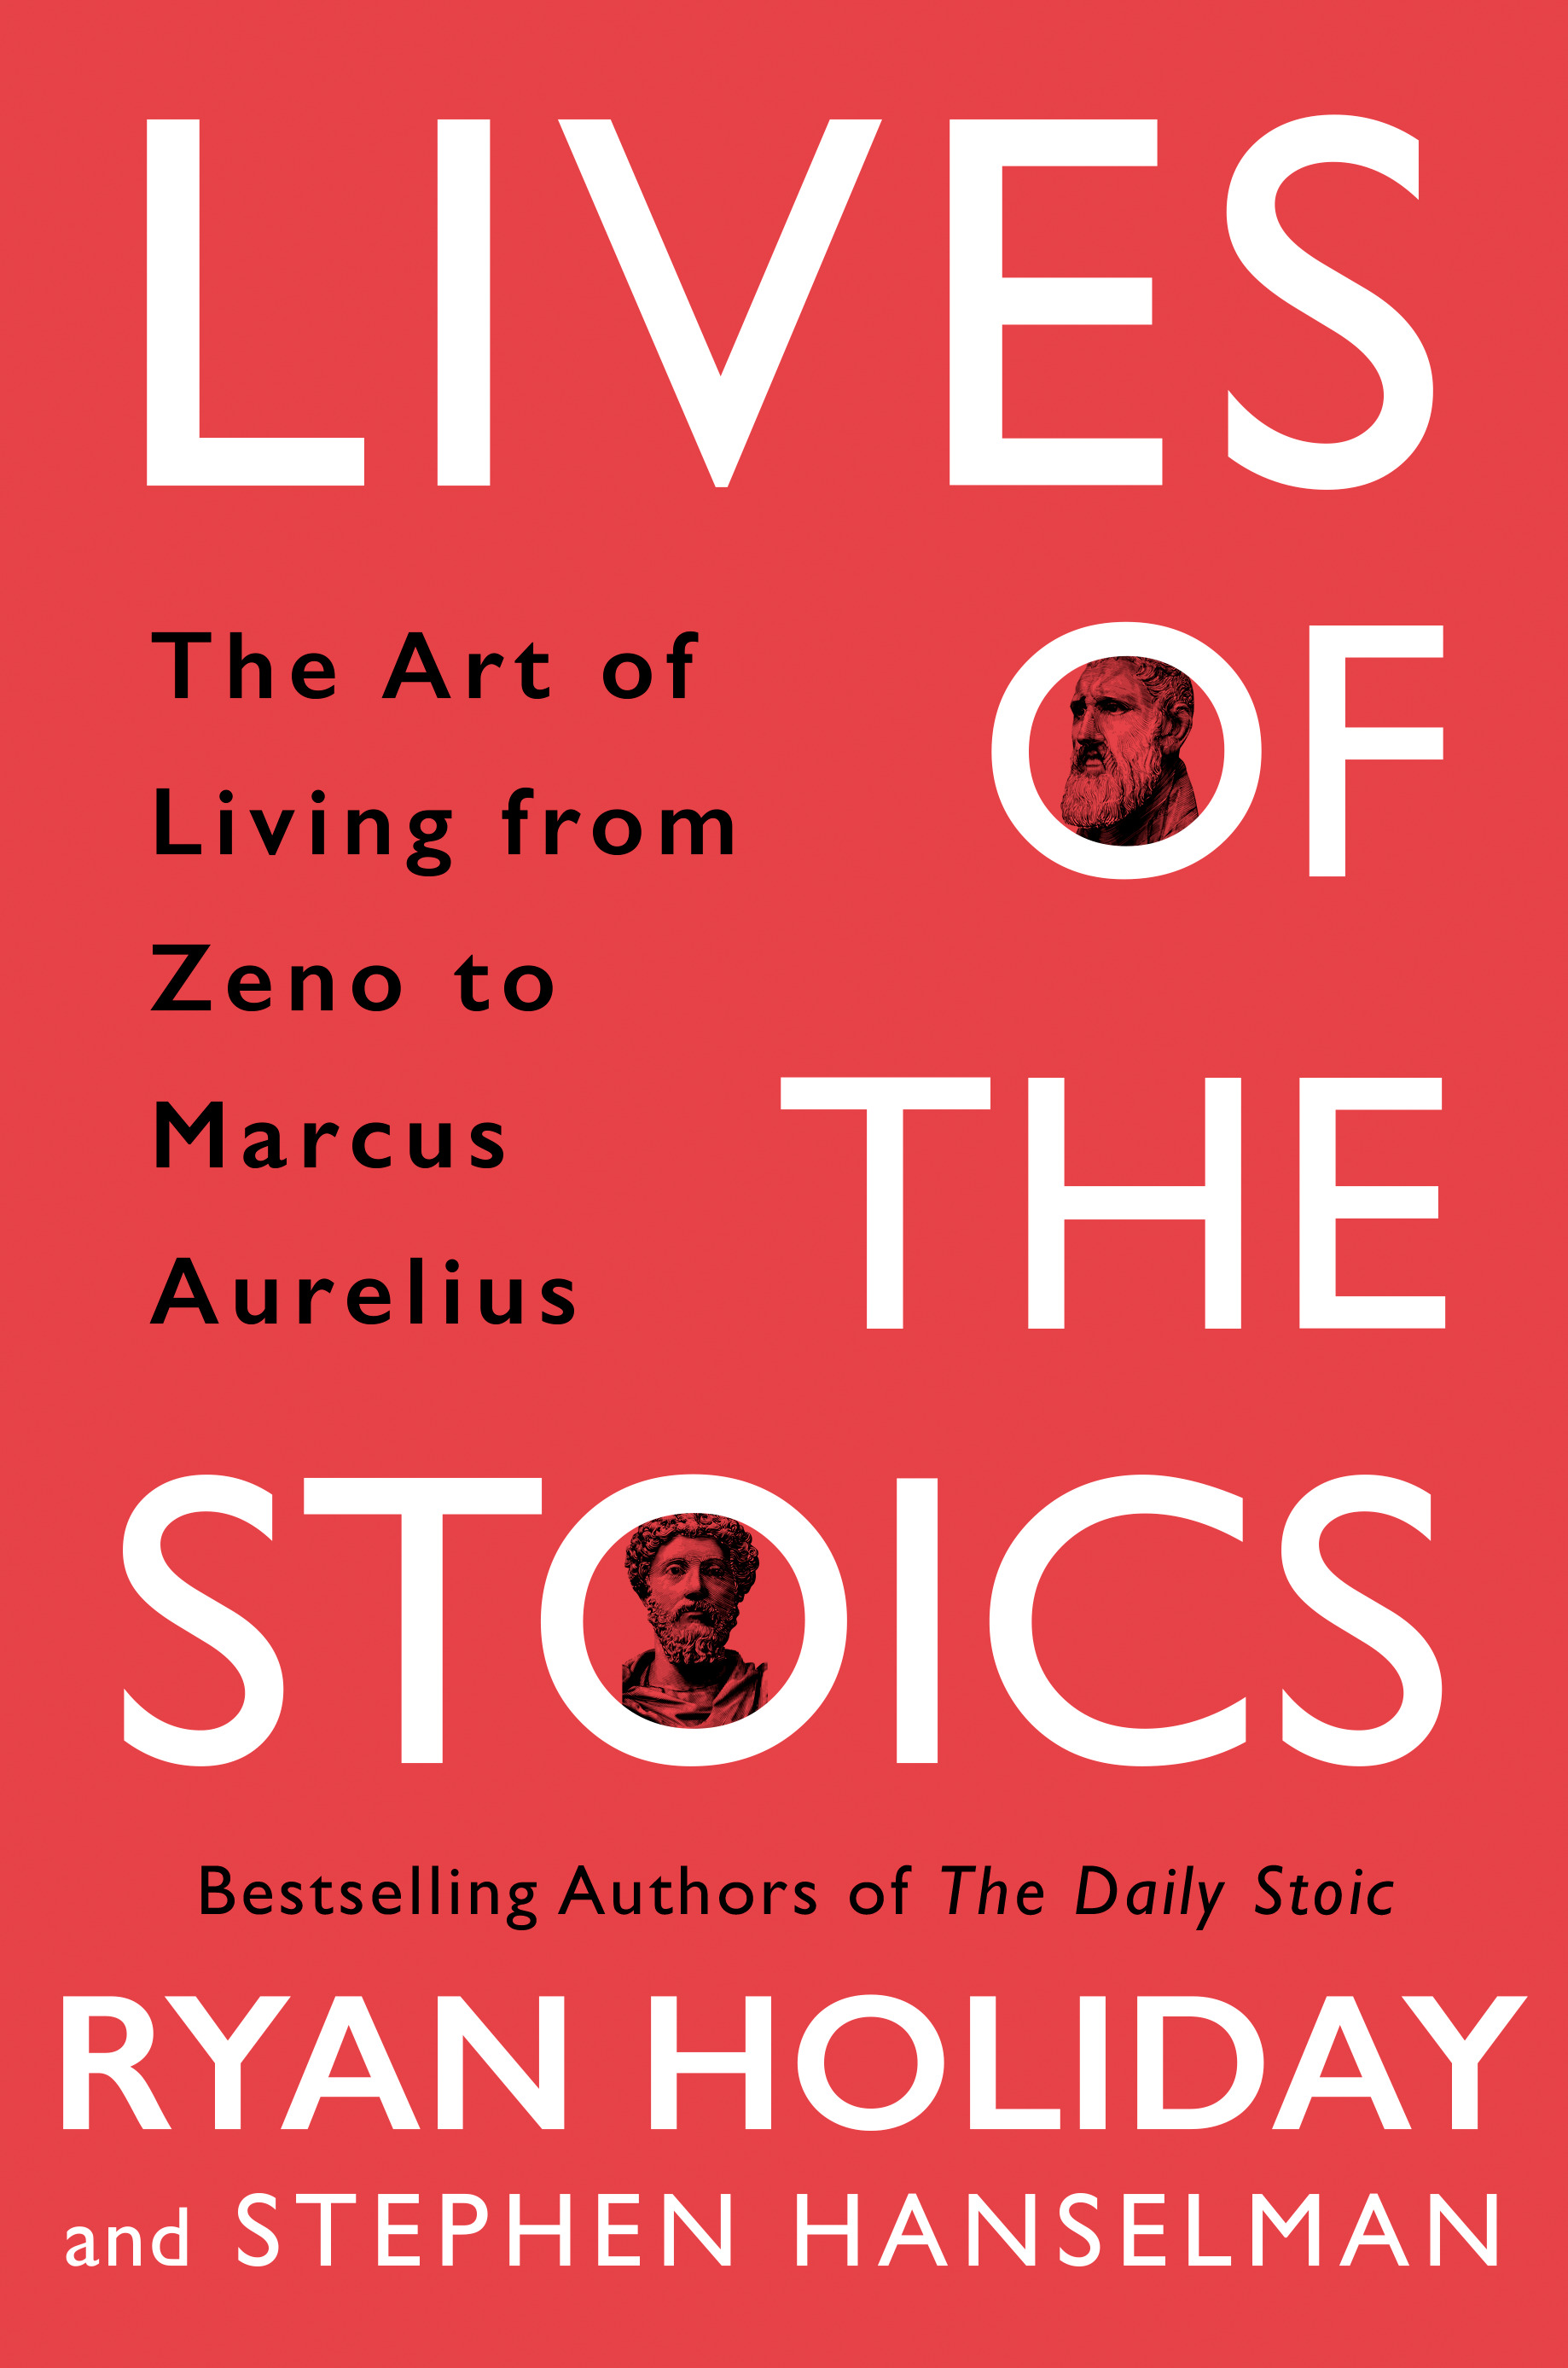 Lives of the Stoics : The Art of Living from Zeno to Marcus Aurelius | Holiday, Ryan